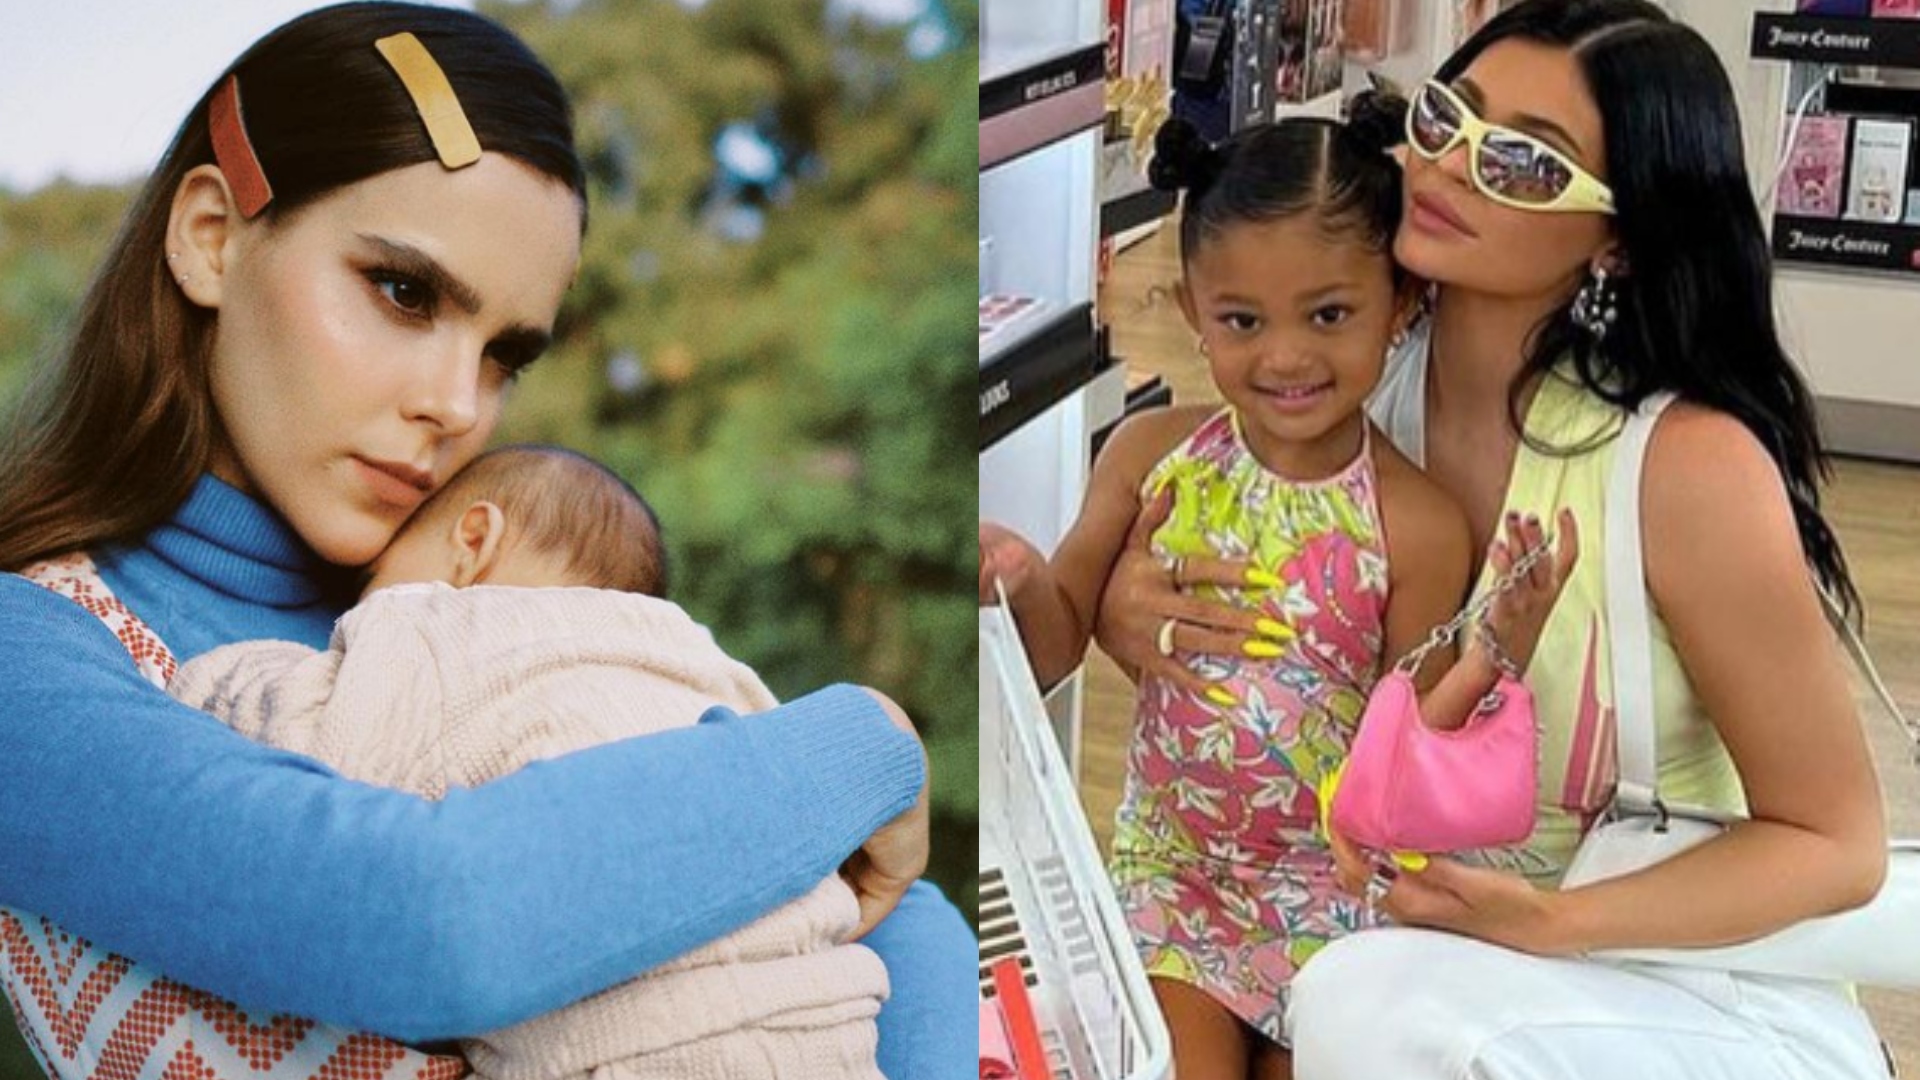 Network users compared Mar with Stormi (Photos: Instagram)